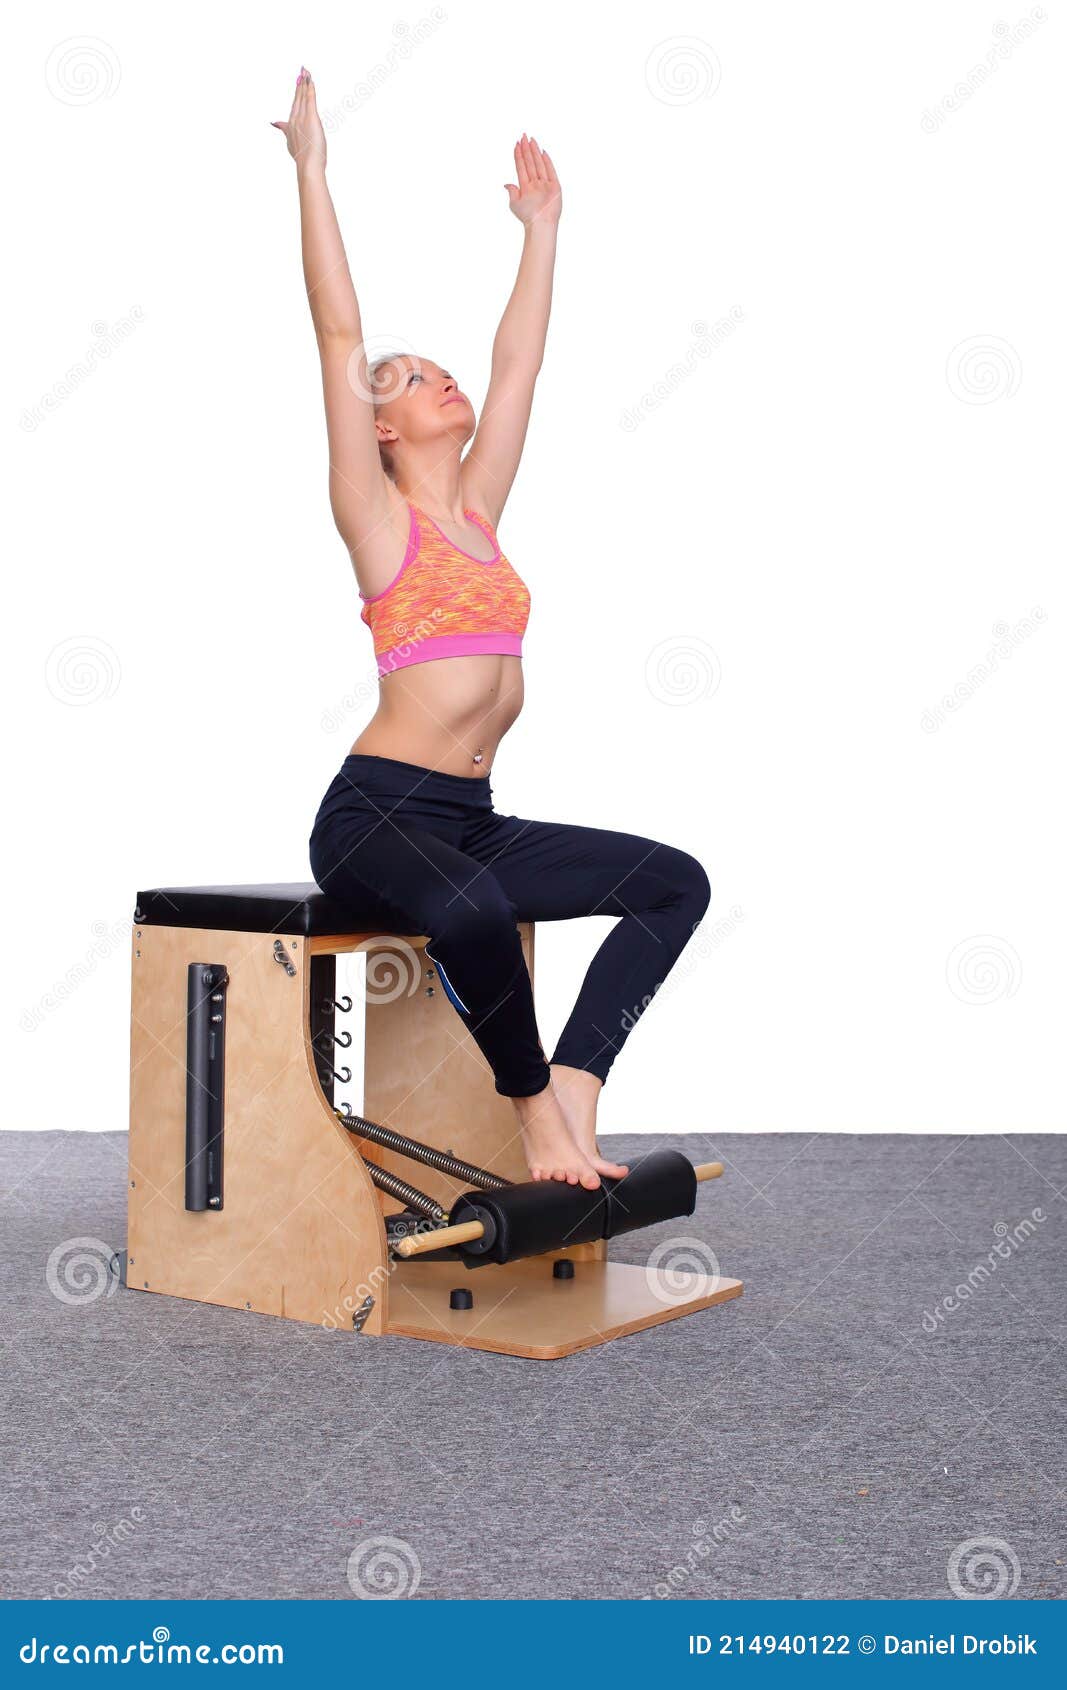 A 20-year-old Trainer Practices Pilates on an Elevator Chair